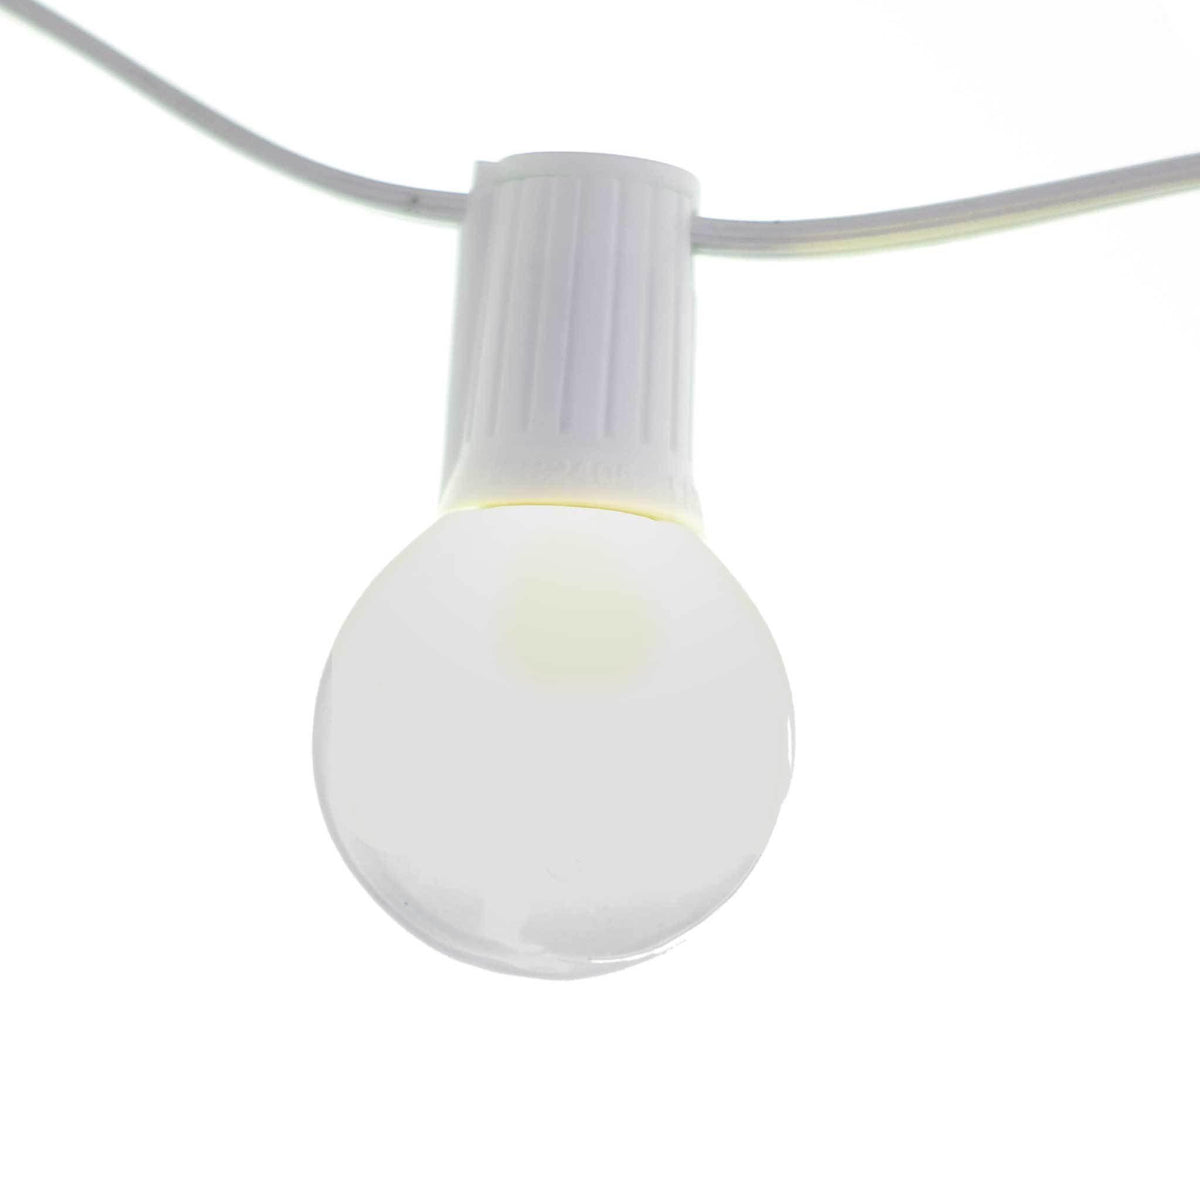 1 Box of 25 of brand new opaque White G40 Globe Light Bulbs Replace your old bulbs today at leedisplay.com